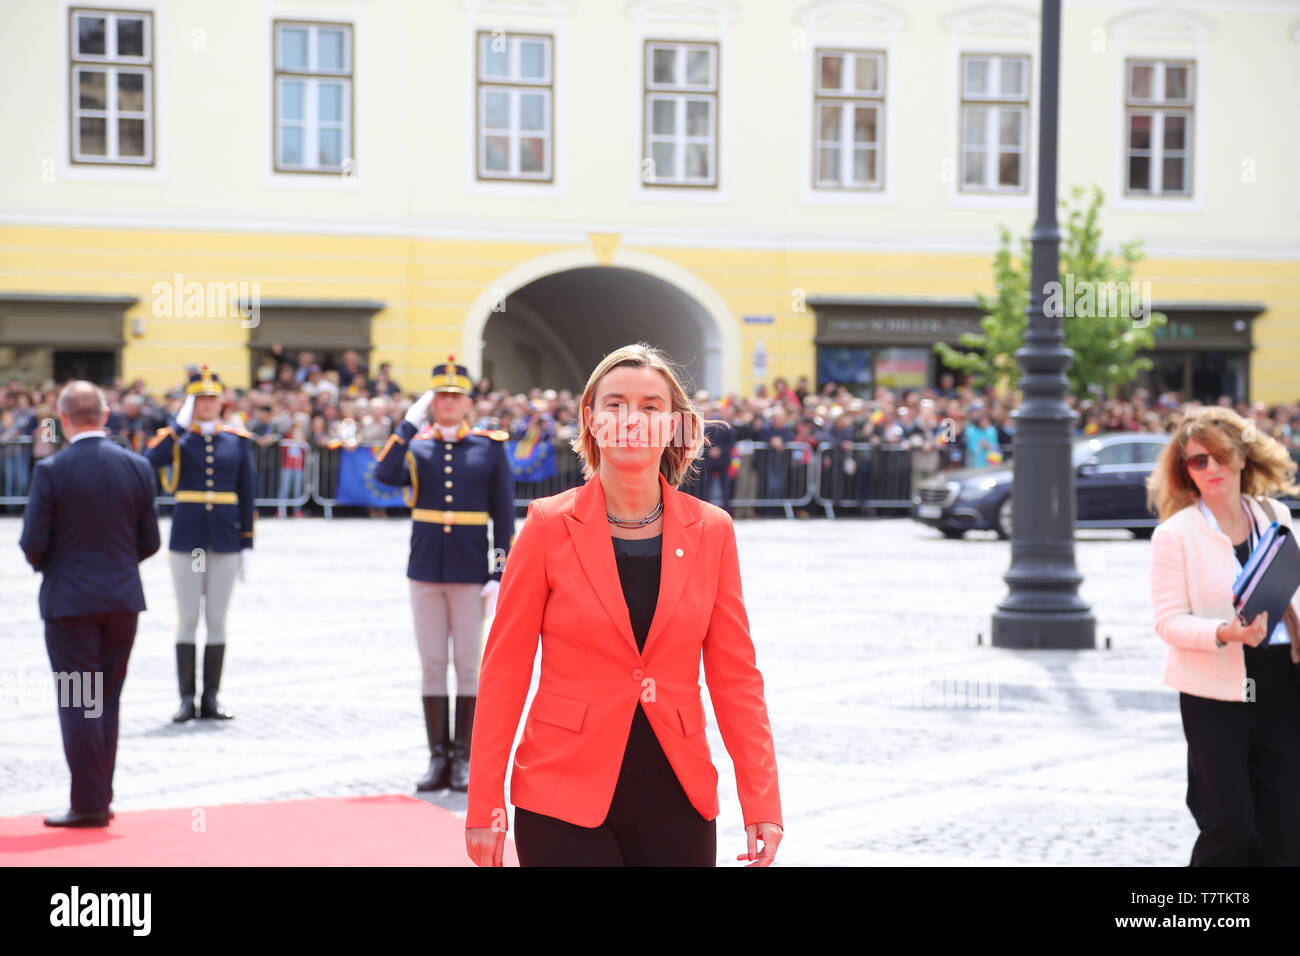 Sibiu, Romania. 9th May, 2019. High Representative of the European Union (EU) for Foreign Affairs and Security Policy Federica Mogherini arrives in the Grand Square in front of the Sibiu City Hall to attend the EU informal summit in Sibiu, Romania, May 9, 2019. The leaders of the EU member states on Thursday agreed on defending 'one Europe' and upholding the rules-based international order in their '10 commitments' declaration, made at an informal summit in Sibiu. Credit: Chen Jin/Xinhua/Alamy Live News Stock Photo